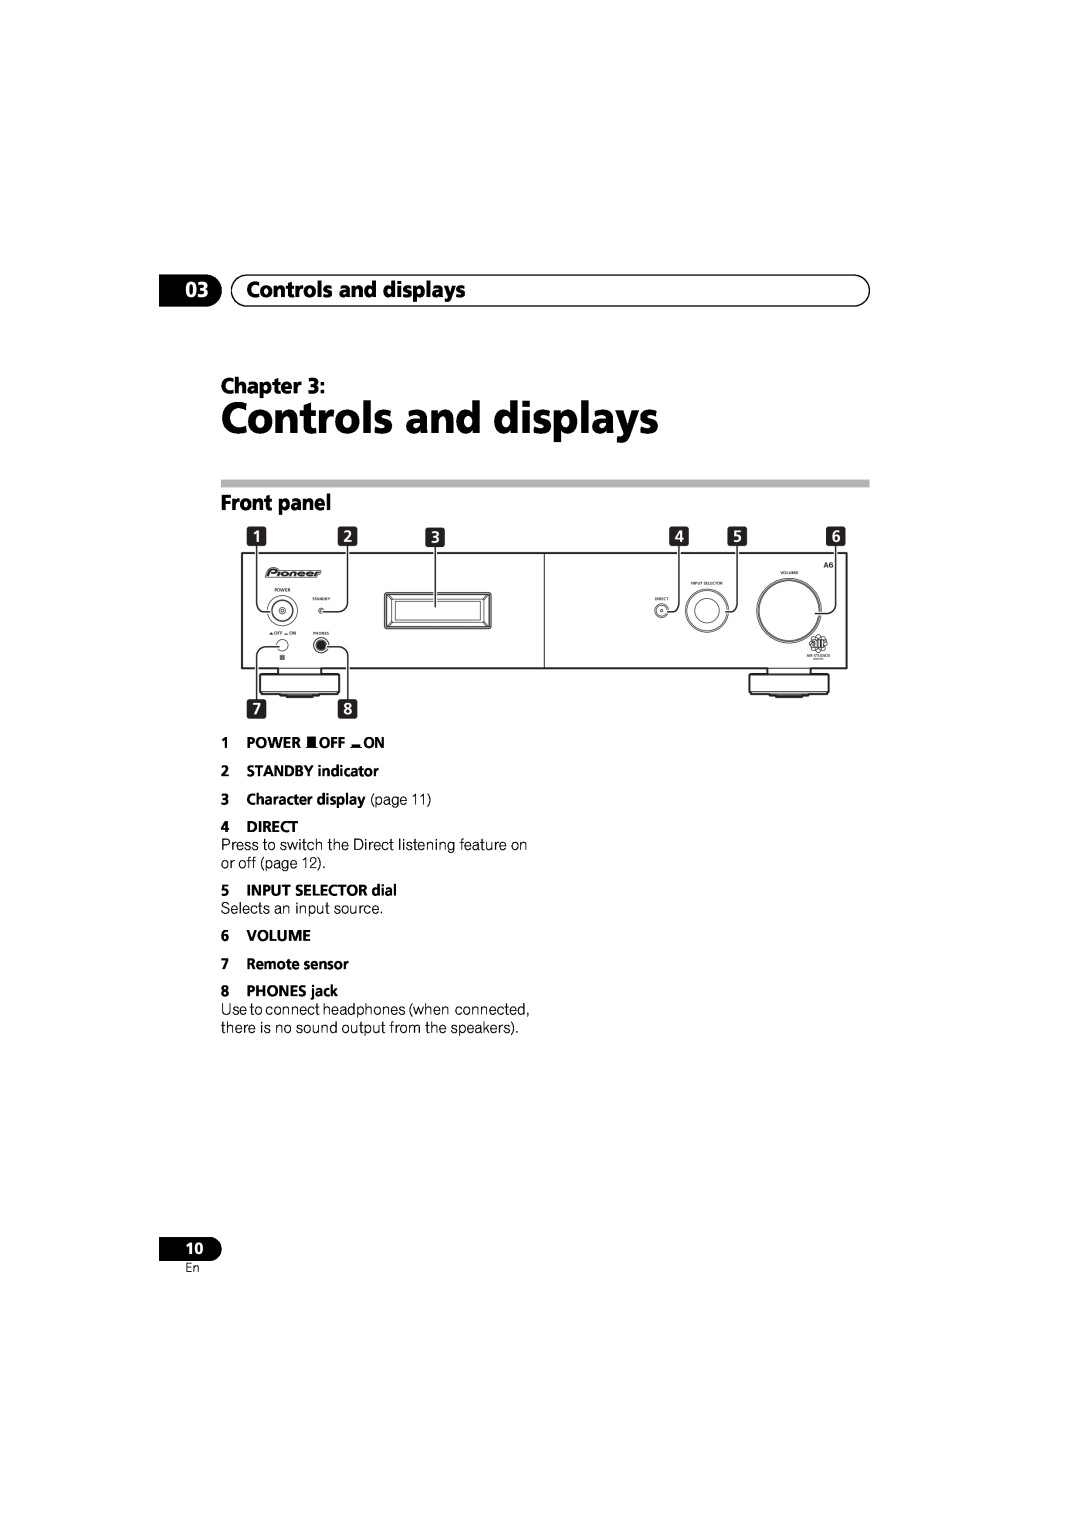 Pioneer A-A6-J manual 03Controls and displays Chapter, Front panel, 1POWER OFF ON 2STANDBY indicator 